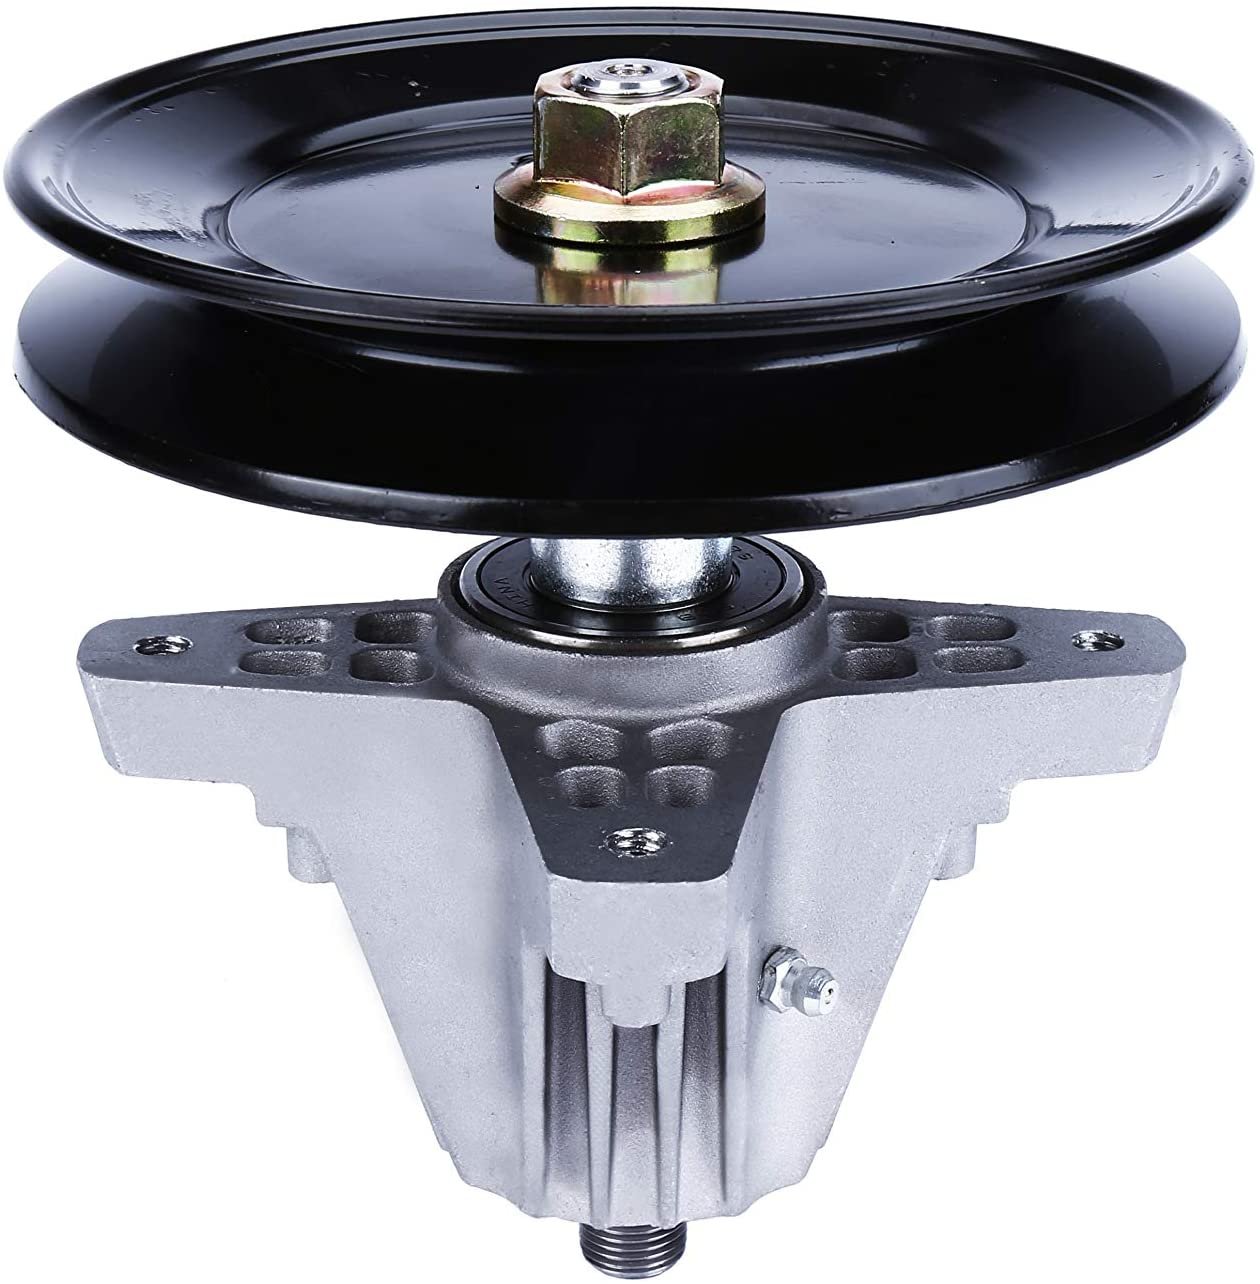 Replacement Spindle Assembly with Pulley - Compatible with MTD, Troy-Bilt and Cub Cadet 42 Inch Deck Lawn Mowers - Replaces 918-04822B, 618-04822, 618-04822A, 618-04822B, 918-04889, 918-04889A